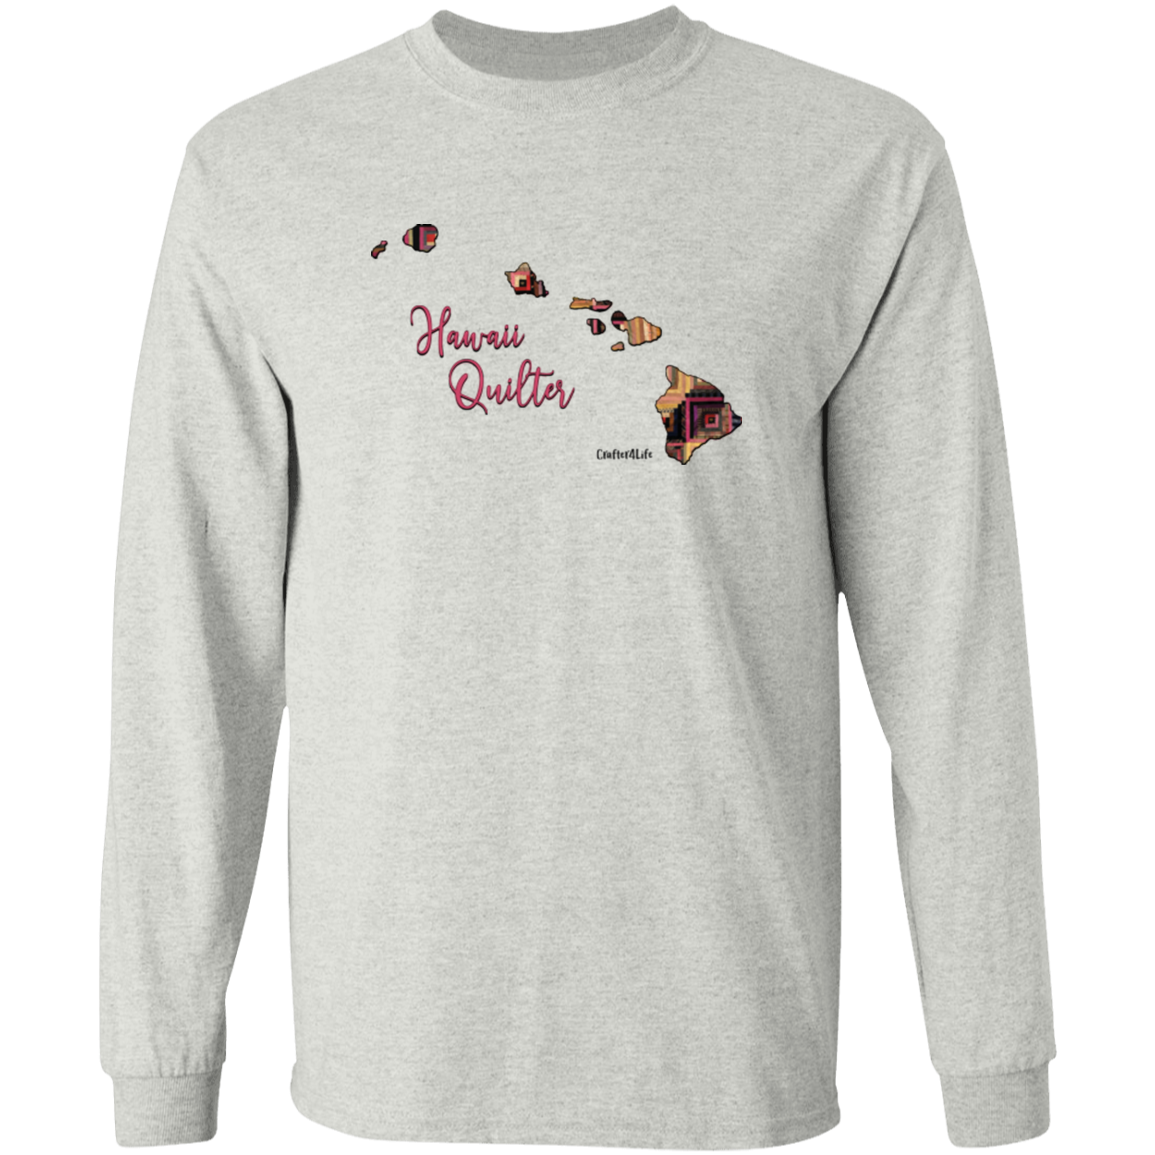 Hawaii Quilter Long Sleeve T-Shirt, Gift for Quilting Friends and Family